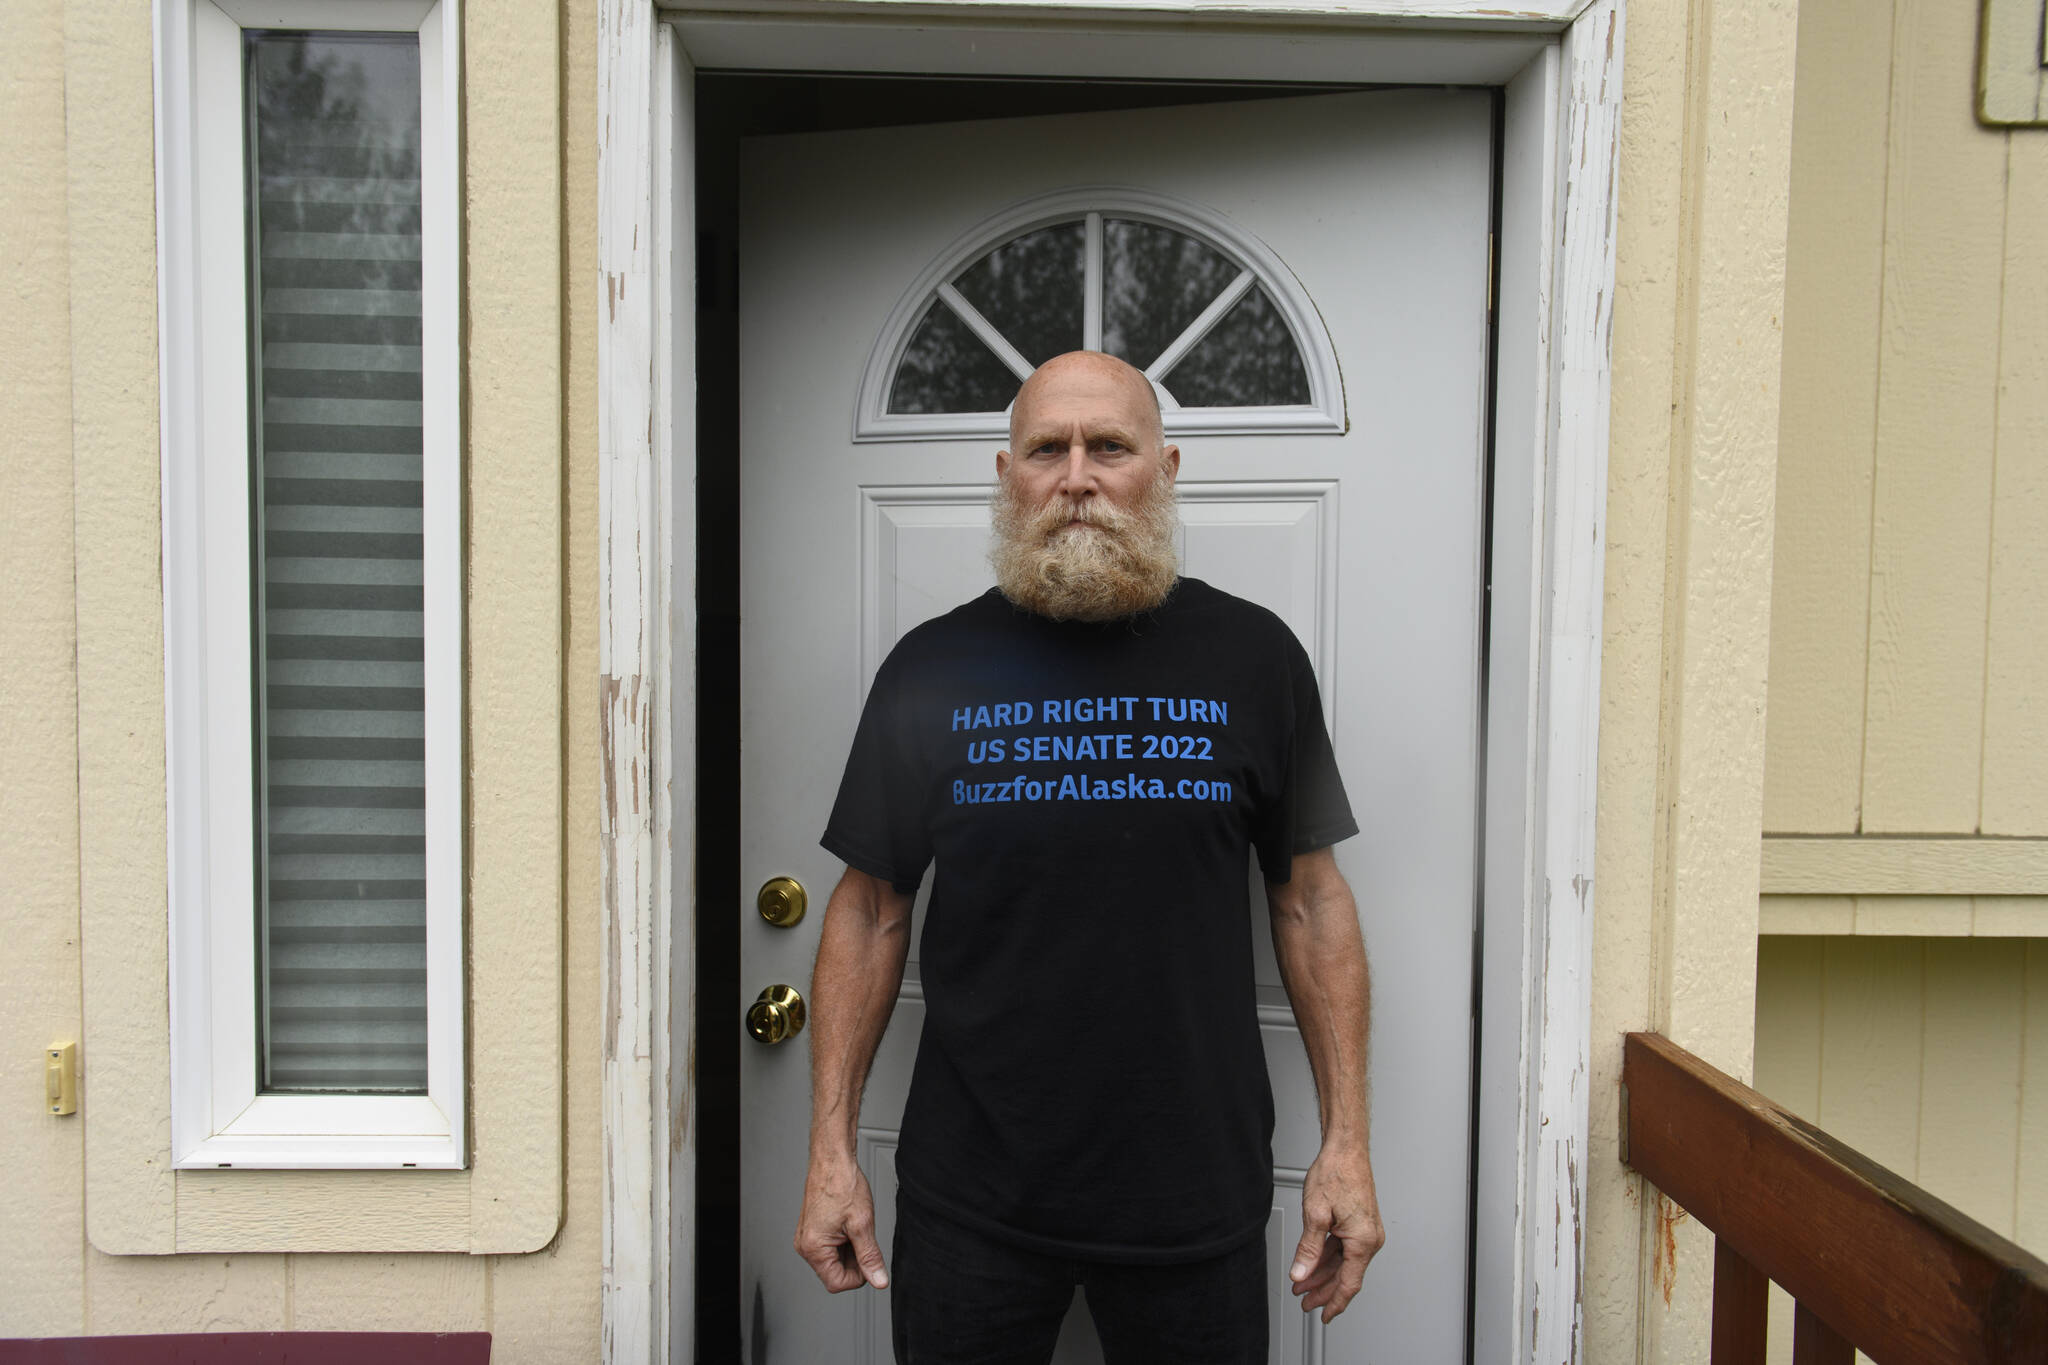 Buzz Kelley, of Wasilla, is pictured at his home on Aug. 19, 2022, in Wasilla, Alaska. Kelley is a candidate for U.S. Senate. (Marc Lester / Anchorage Daily News)